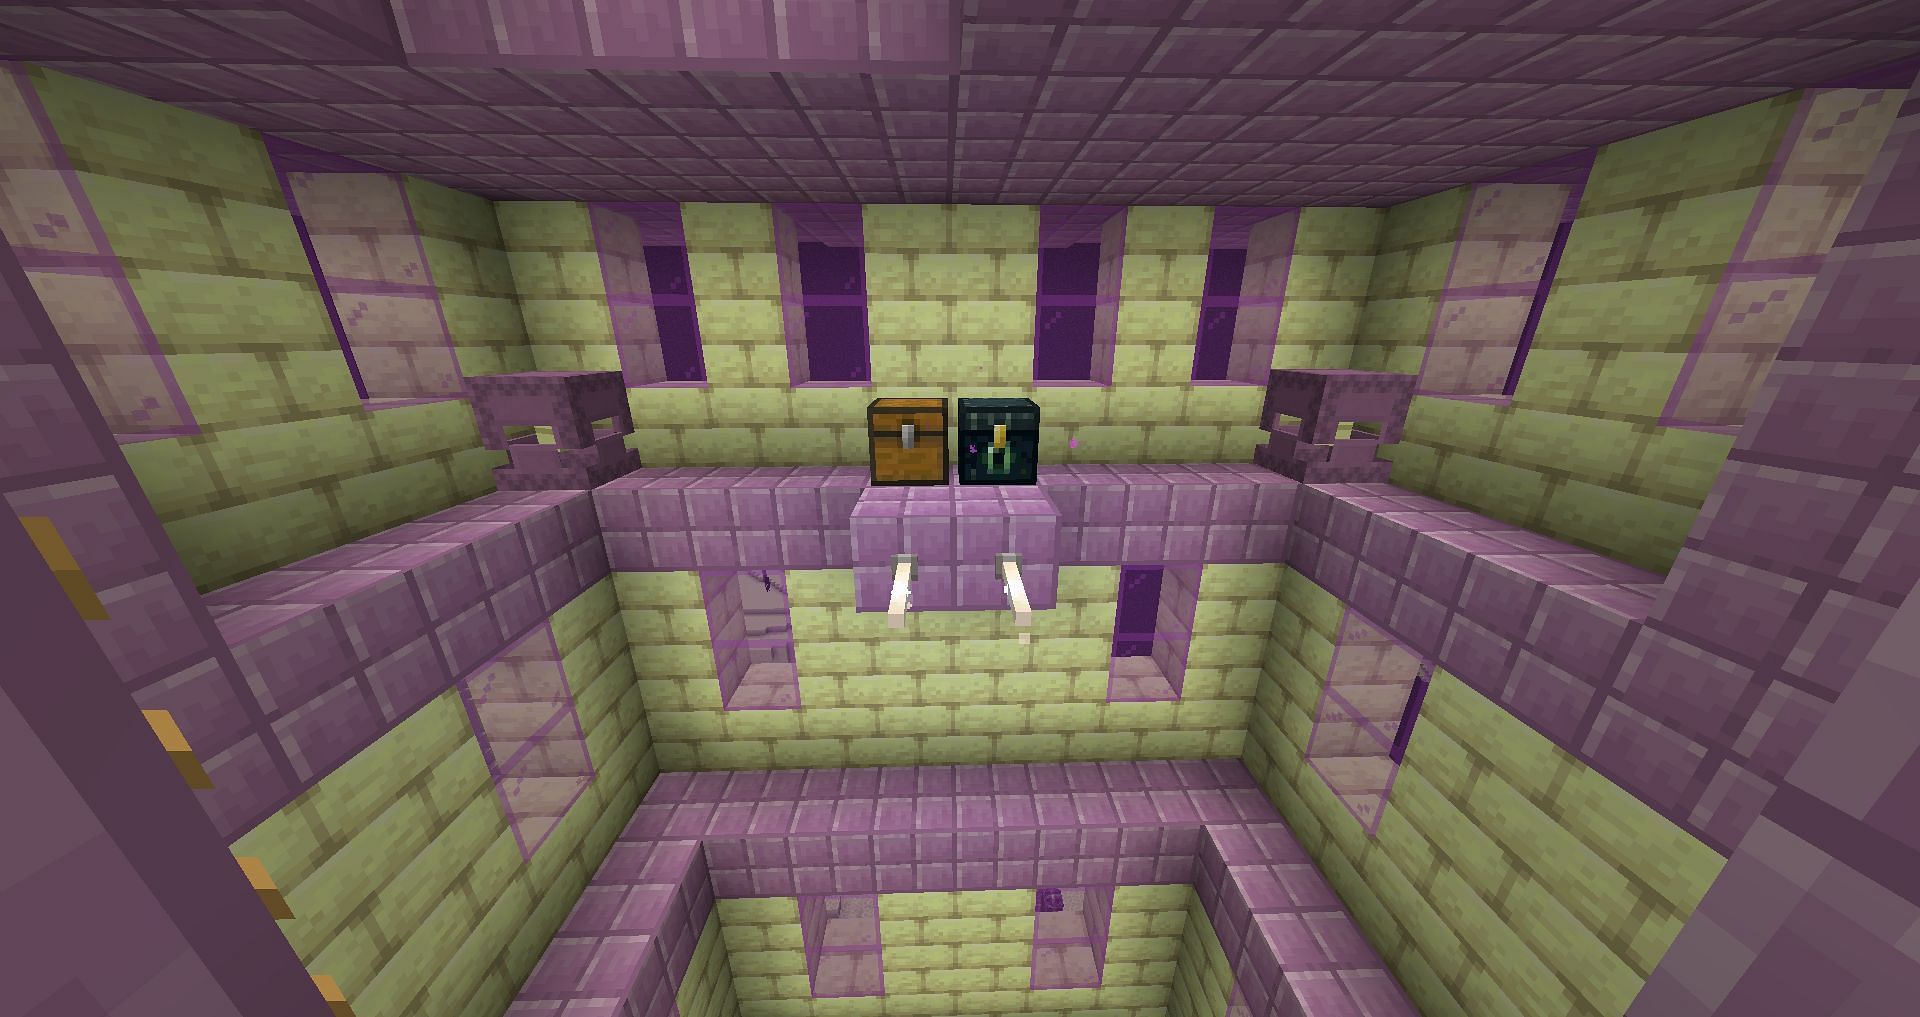 End cities also spawn Ender chest (Image via Minecraft)